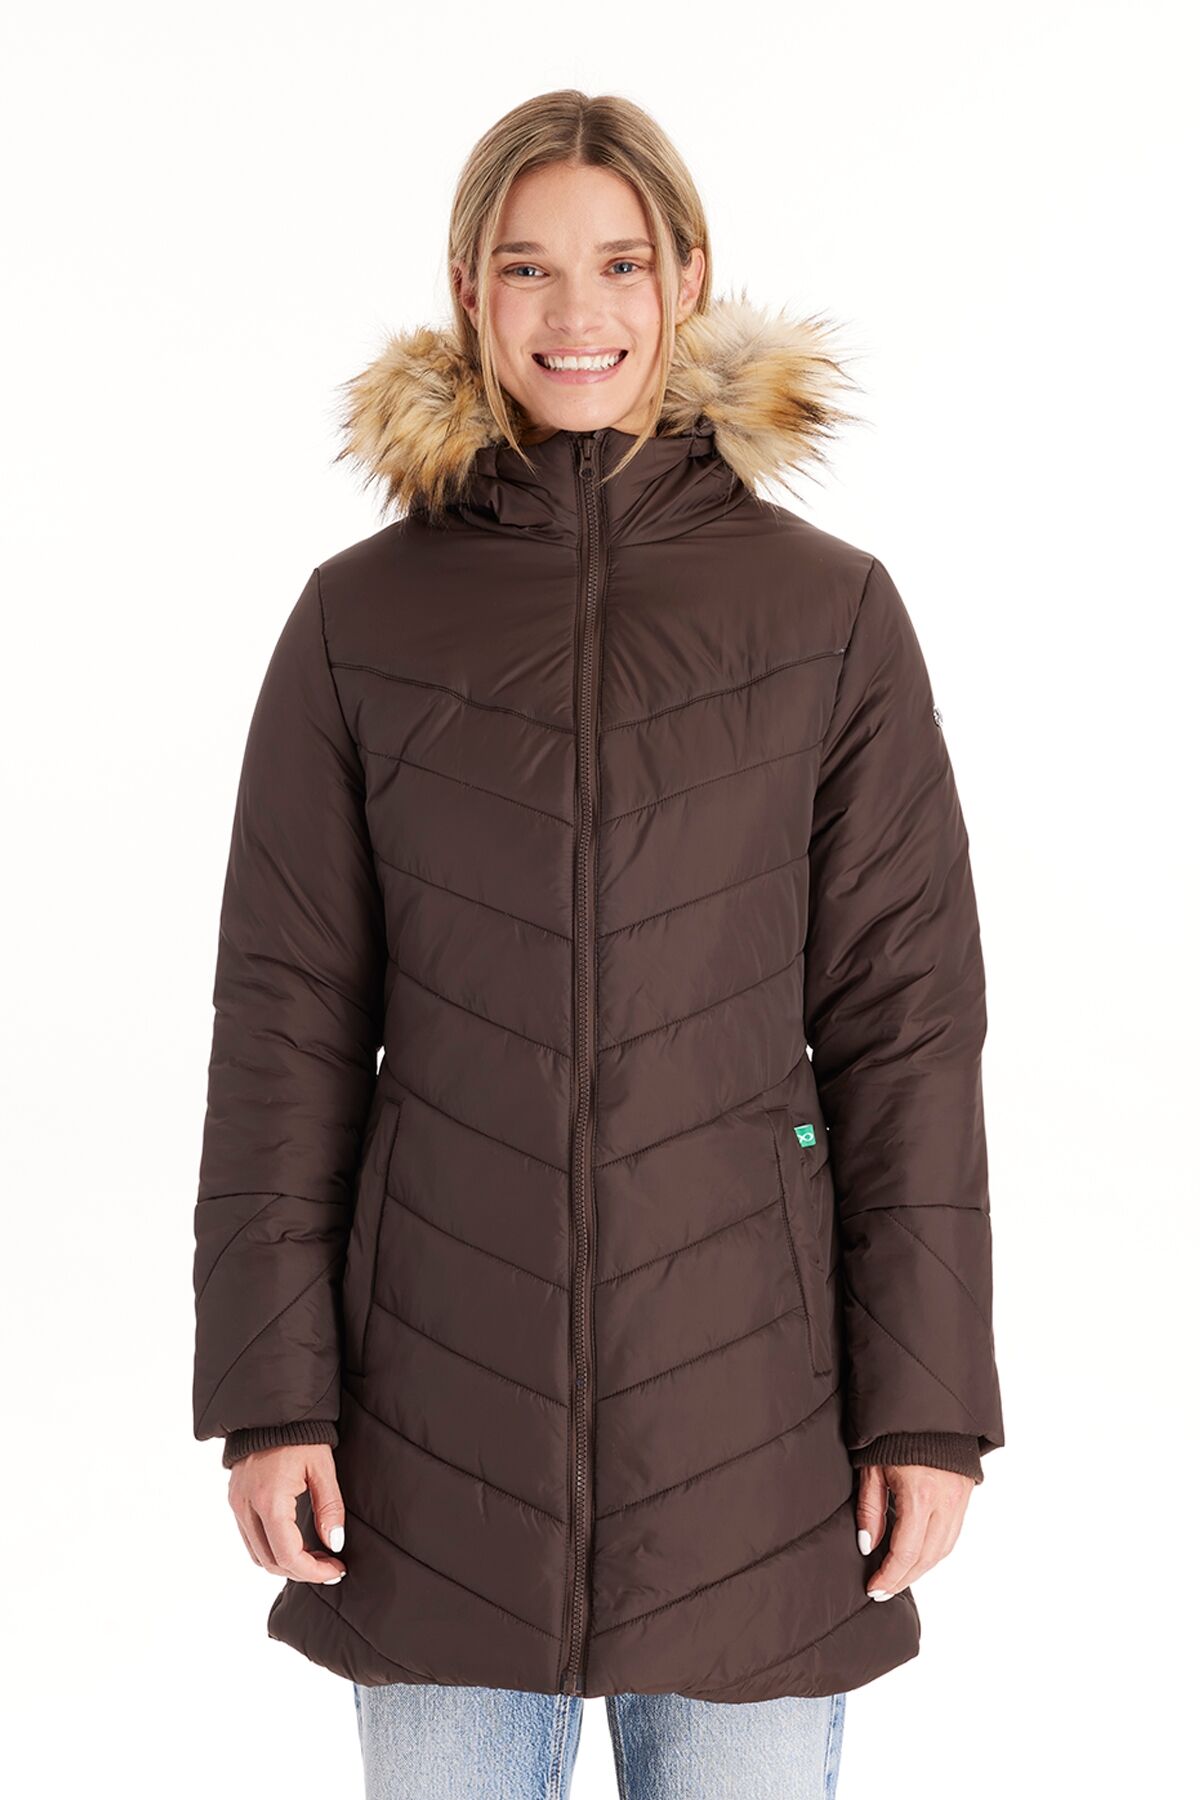 Modern Eternity Maternity Maternity Lexi - 3in1 Coat With Removable Hood - Dark chocolate